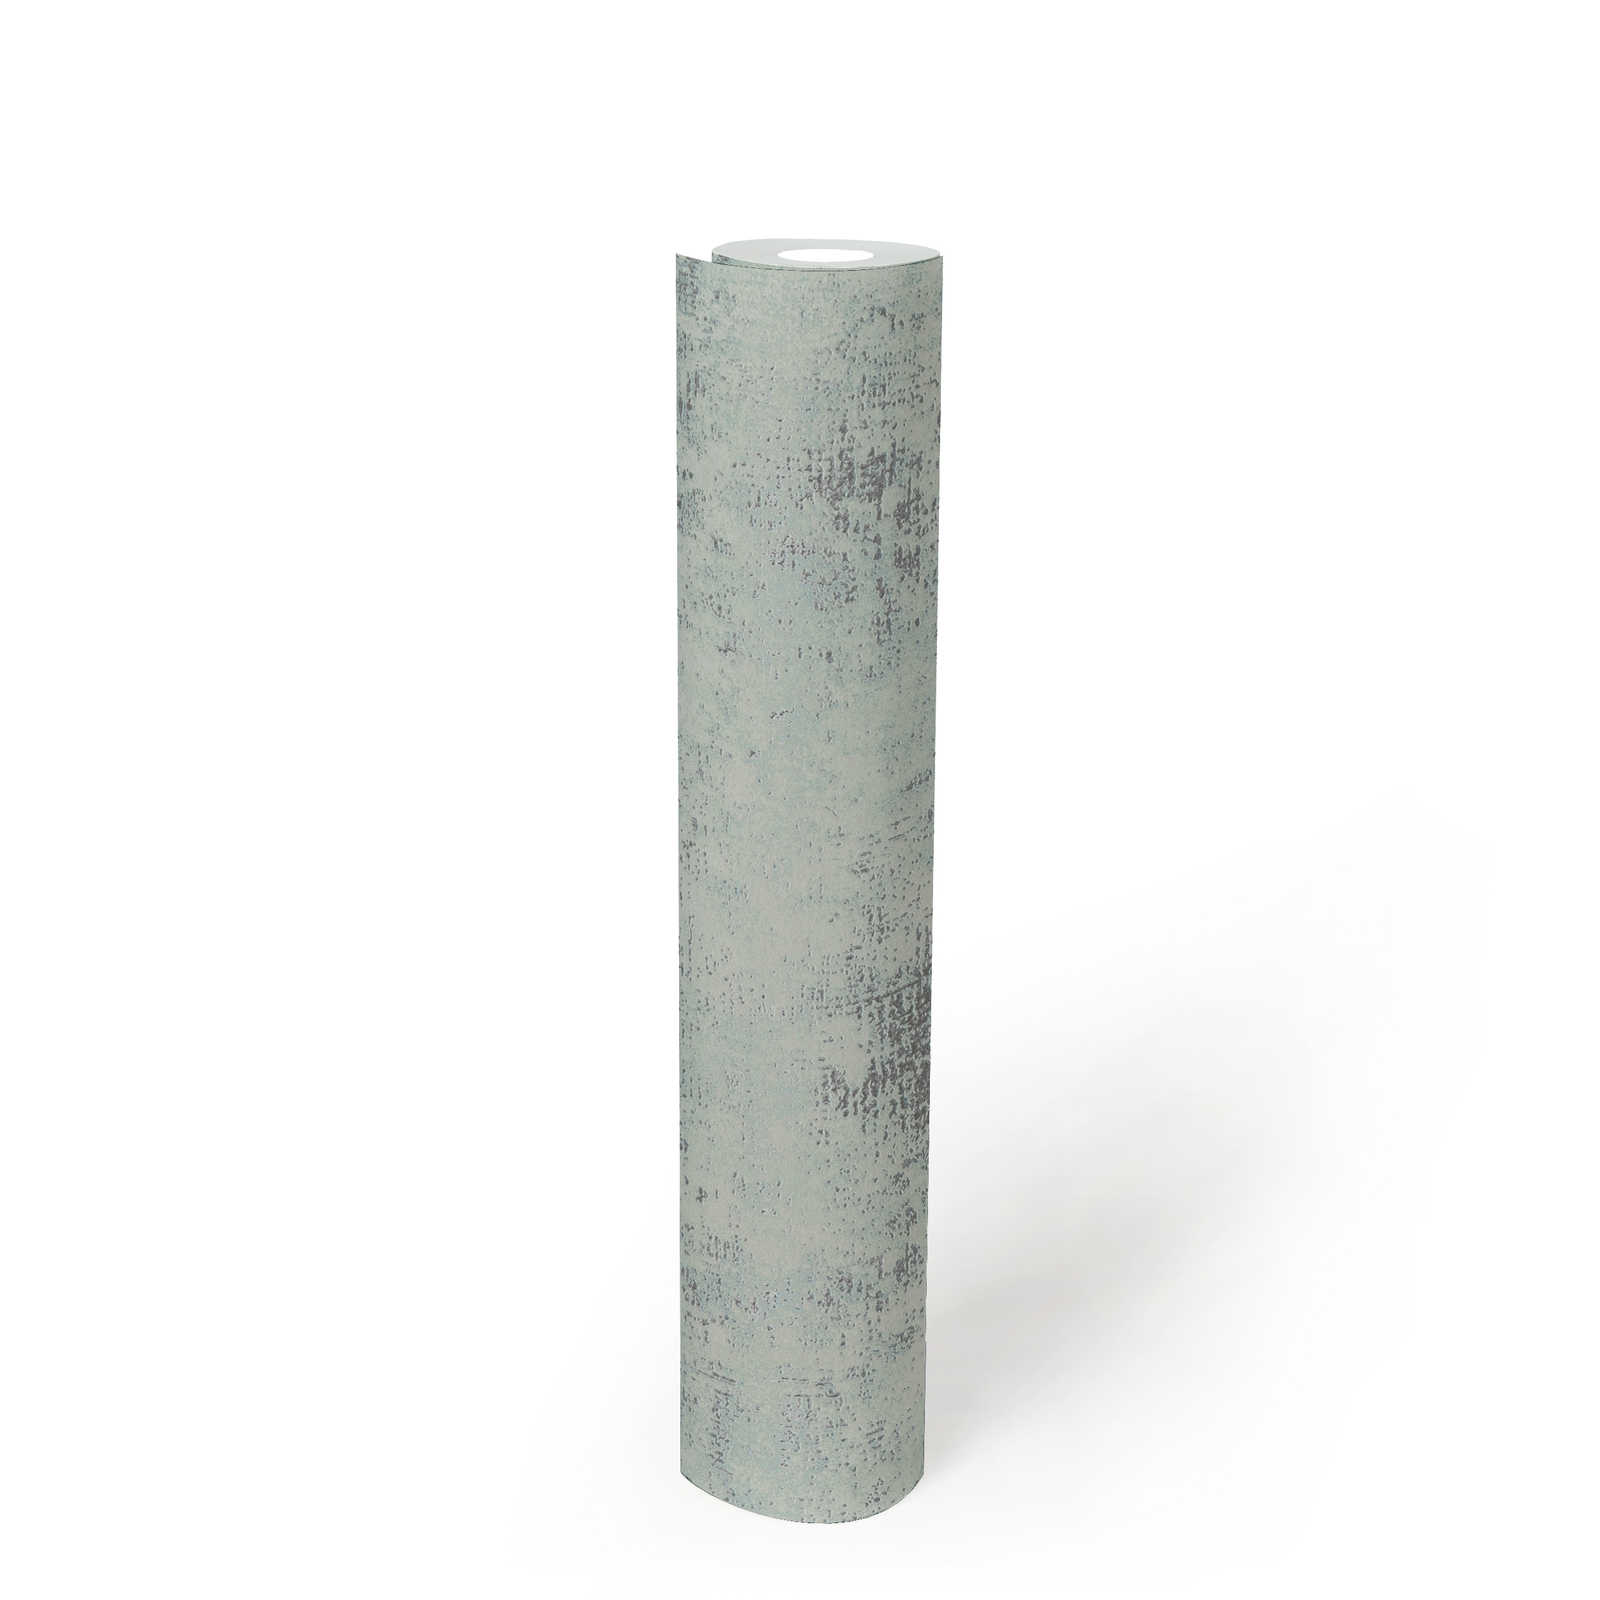             Rustic plaster look wallpaper with structure - blue, green, grey
        